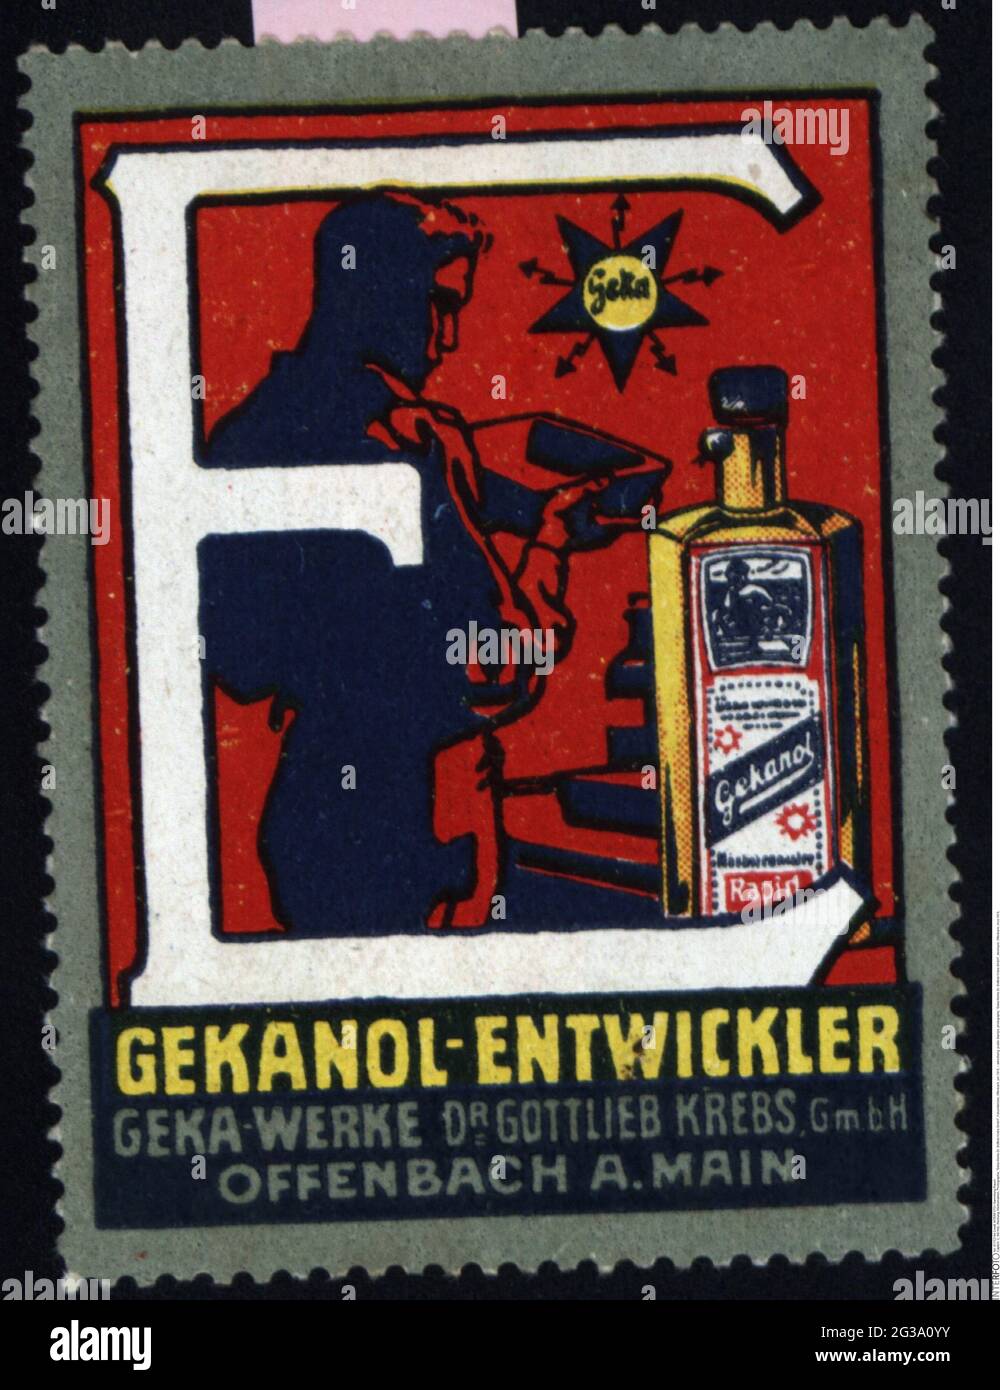 advertising, poster stamps, photography, 'Geka-Werke Dr. Gottlieb Krebs GmbH', developer, Offenbach, ADDITIONAL-RIGHTS-CLEARANCE-INFO-NOT-AVAILABLE Stock Photo